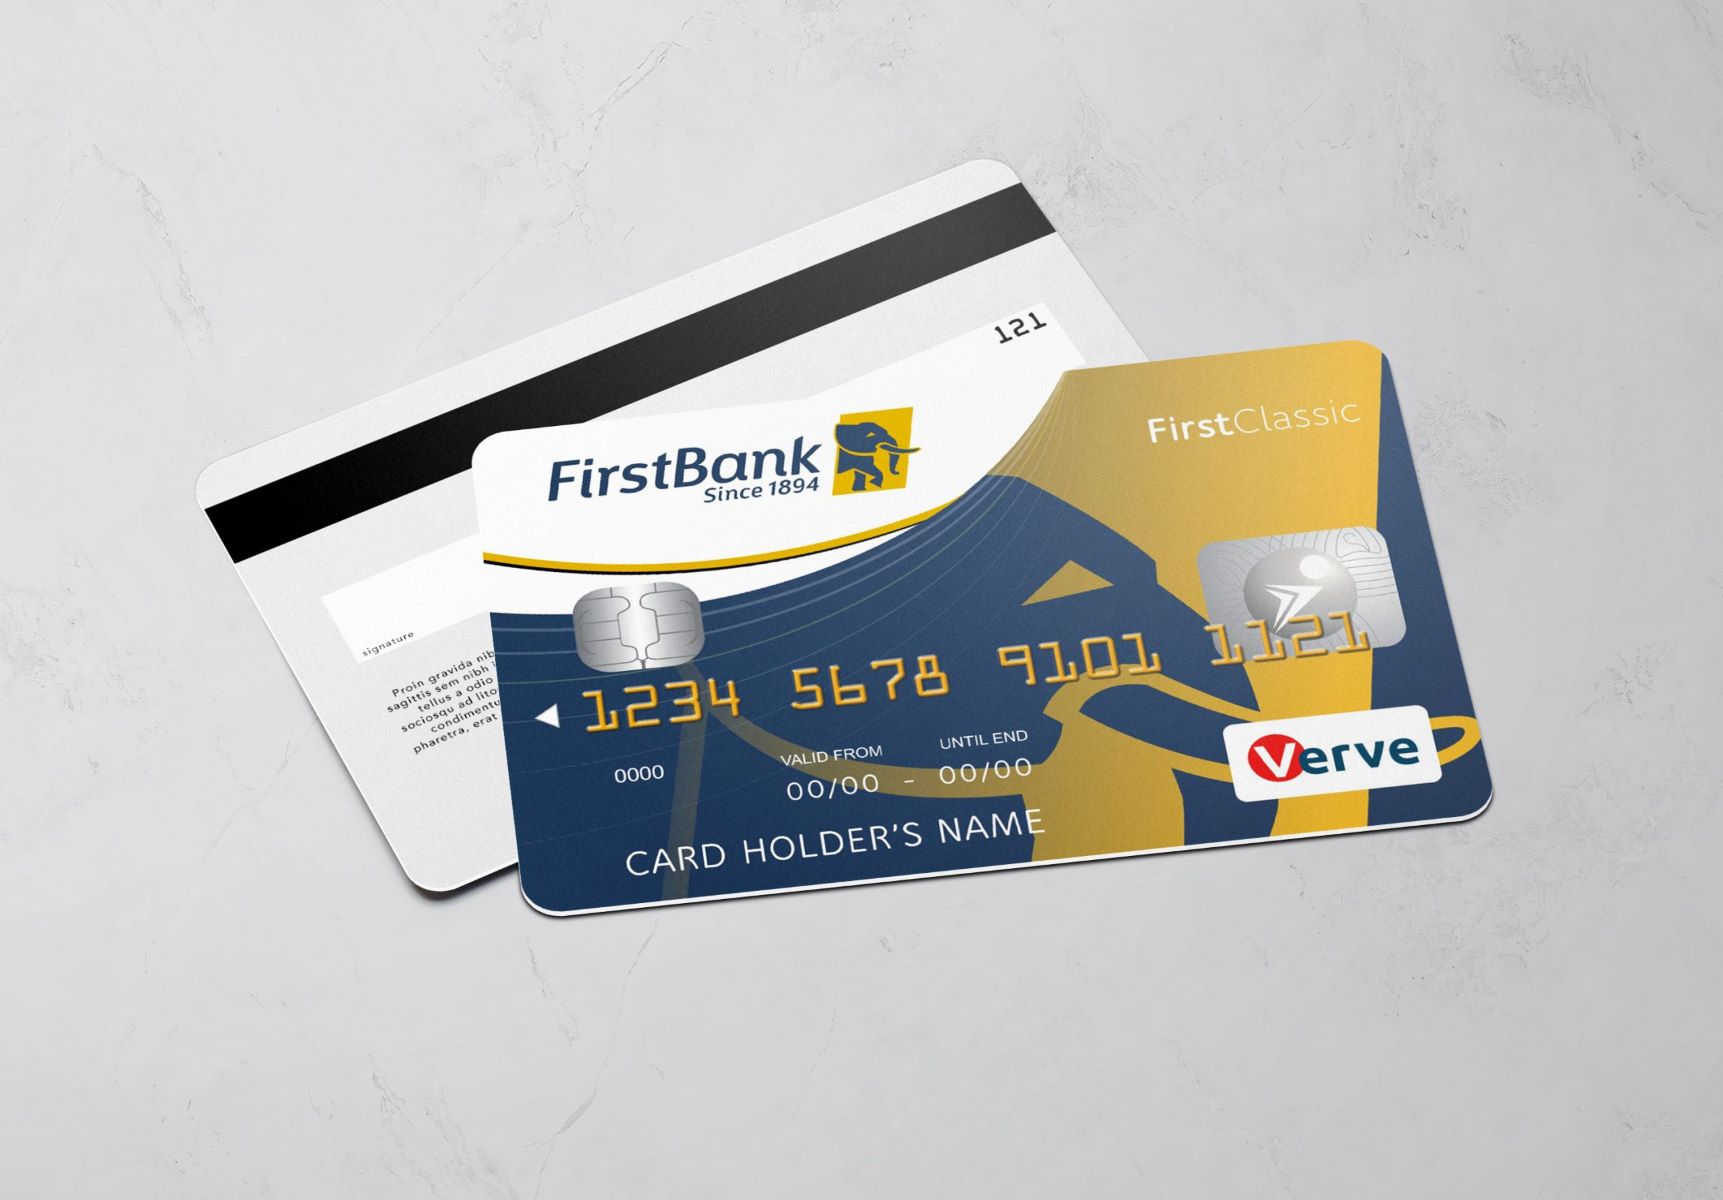 How To Apply For A Verve Credit Card